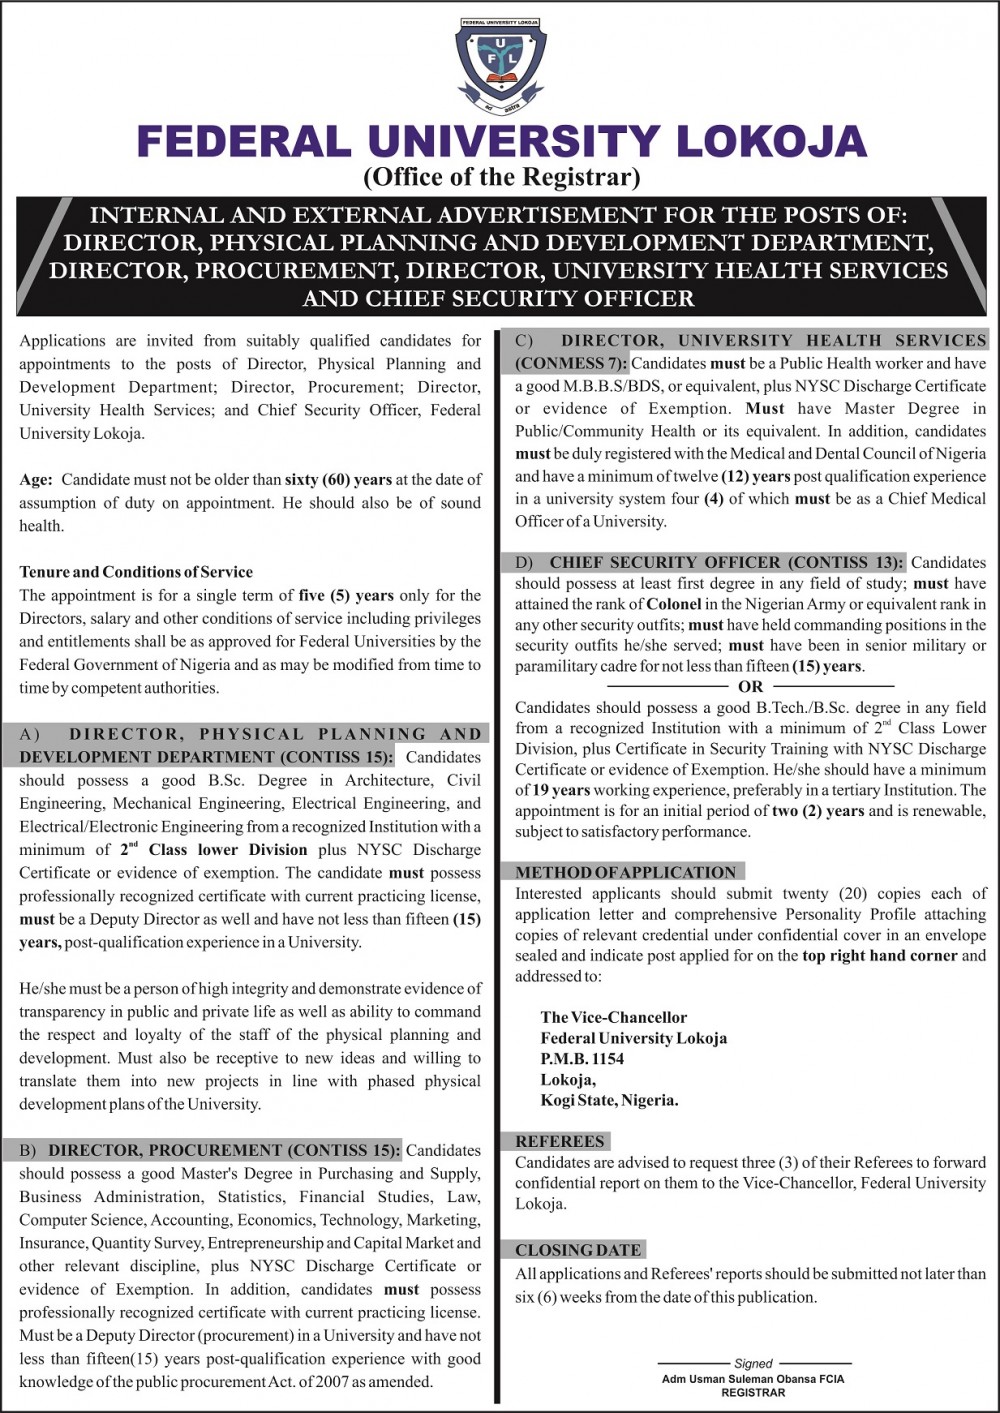 internal-and-external-advertisement-for-the-posts-of-directors-and-chief-security-officer